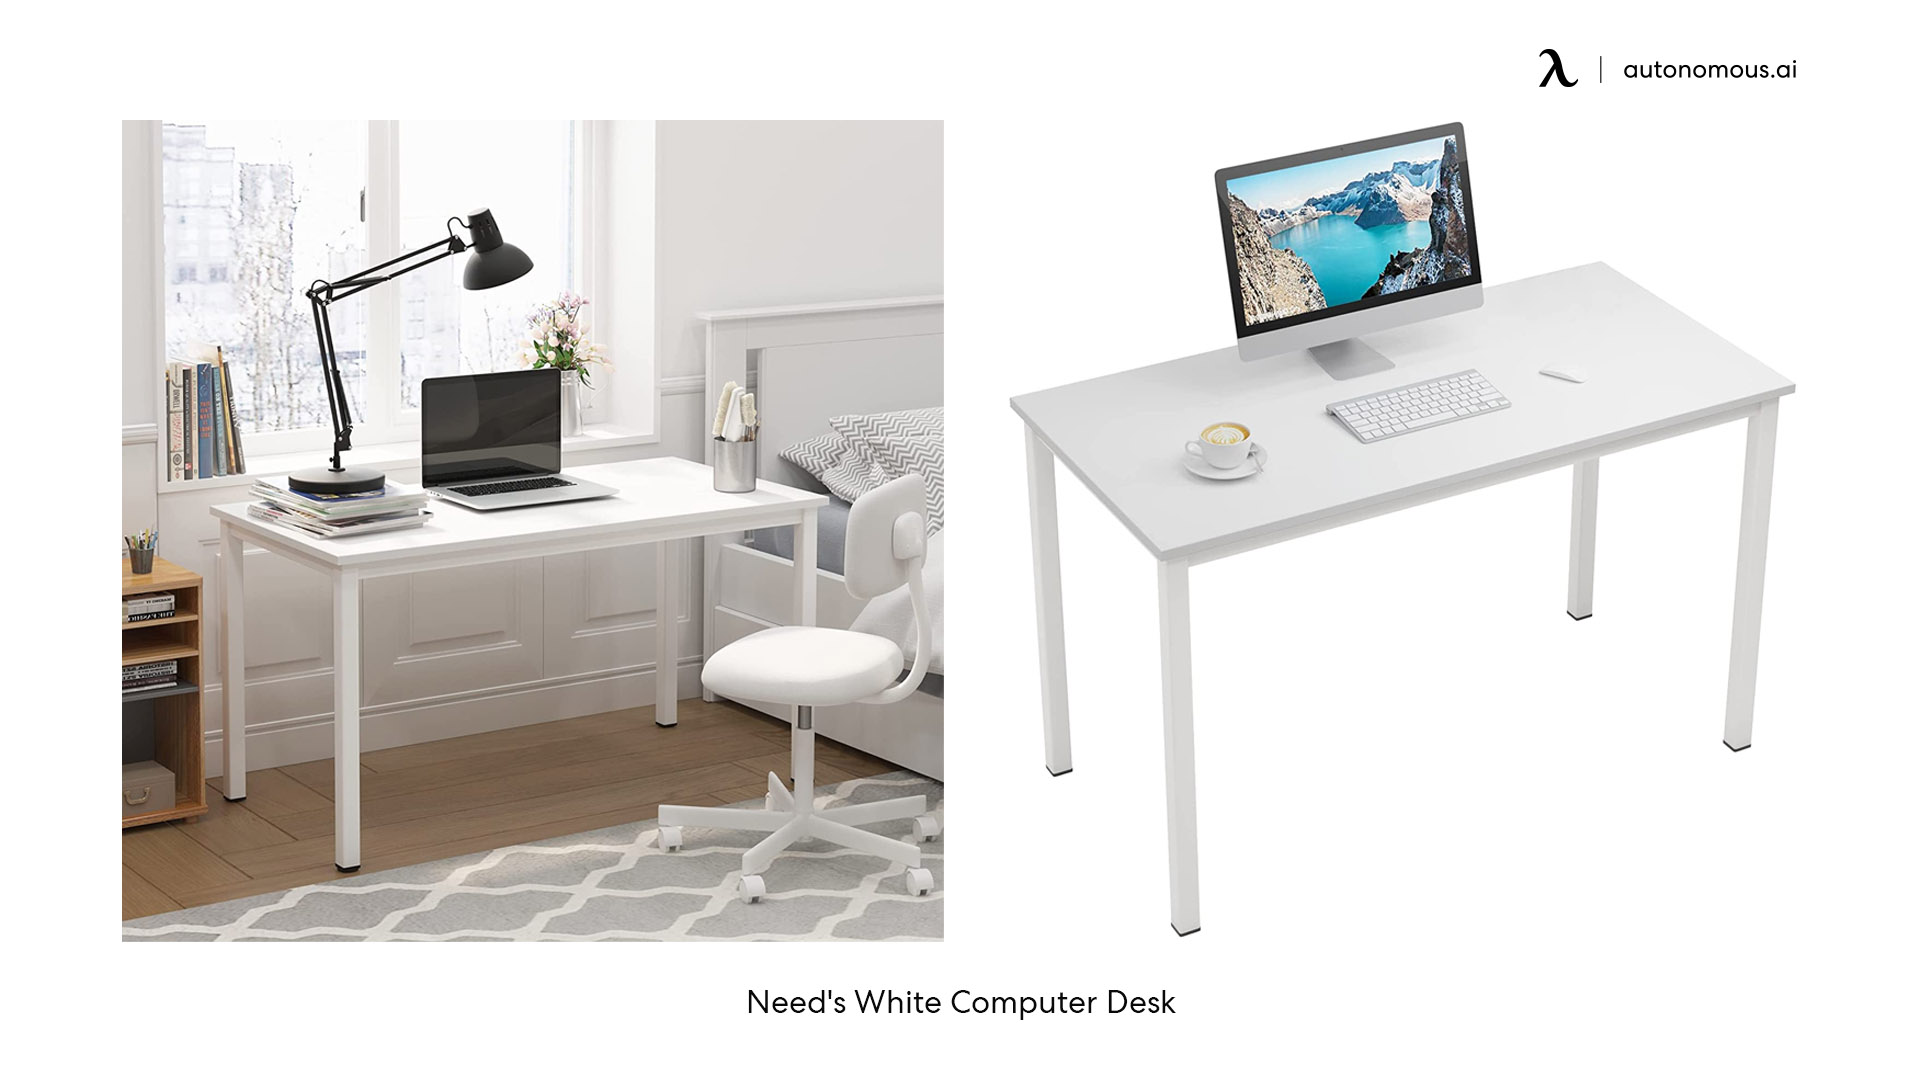 Need's cheap computer desk with drawers